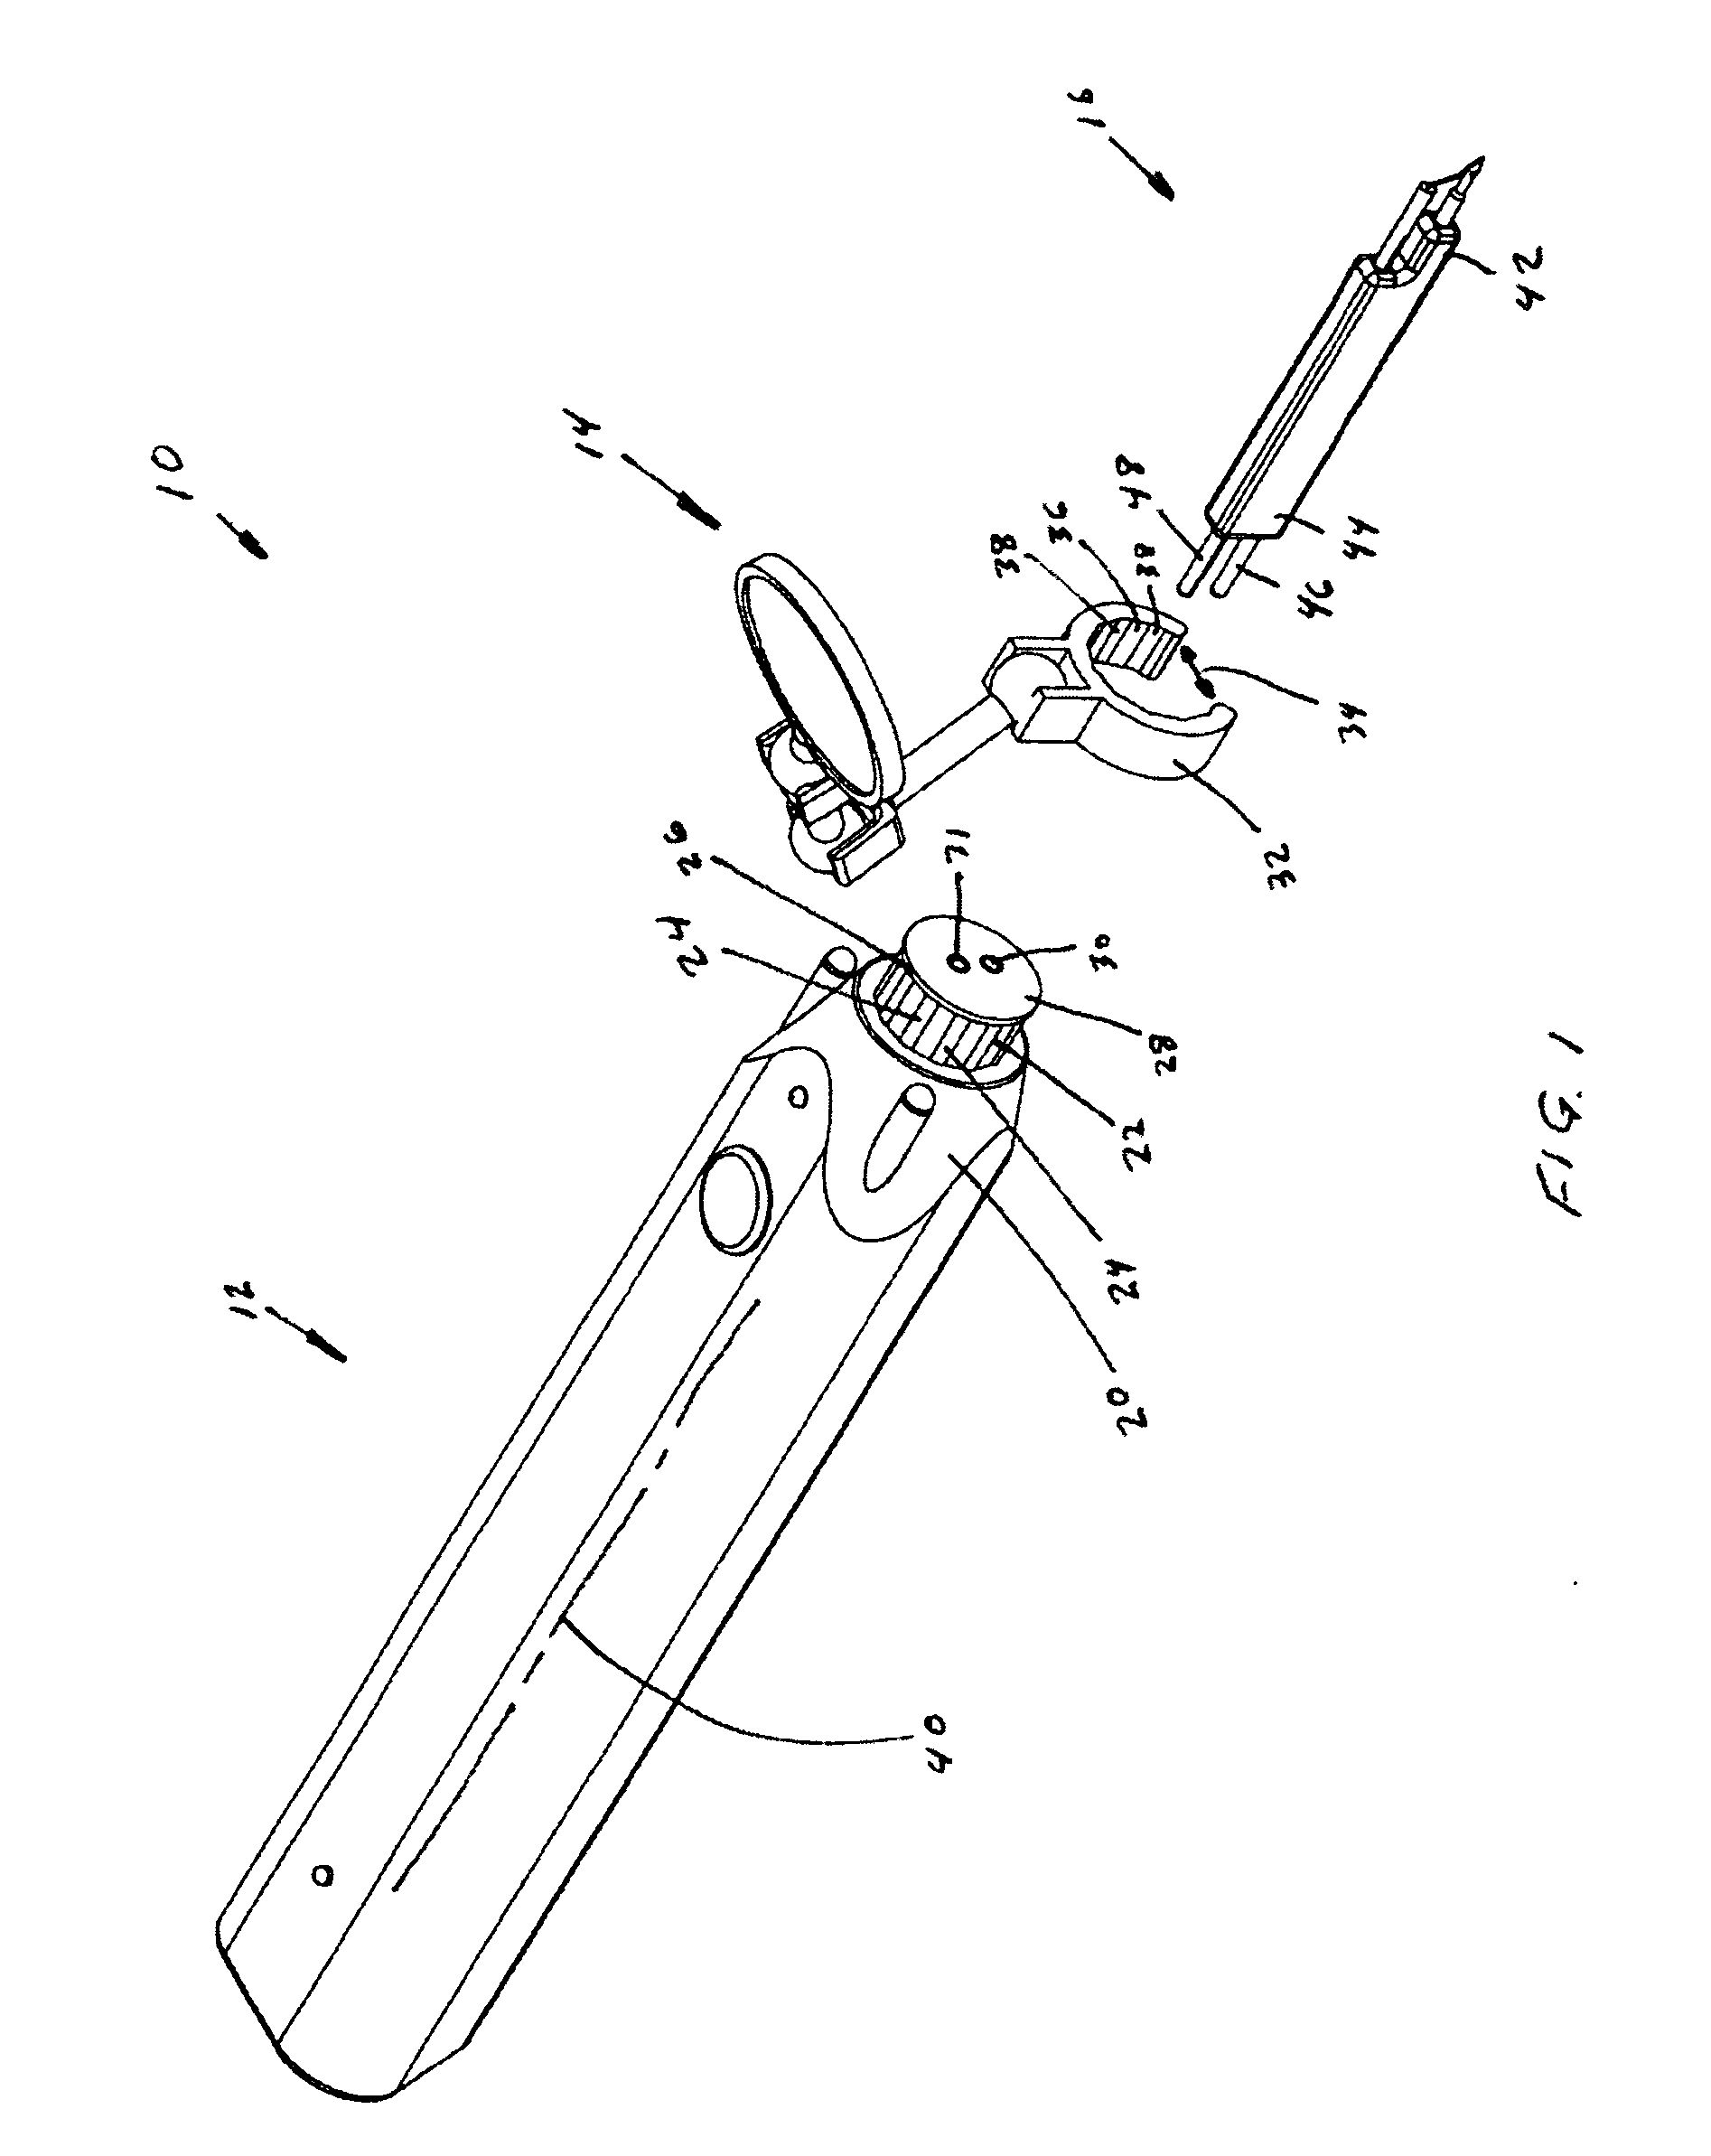 Method, apparatus, and kit for thermal suture cutting